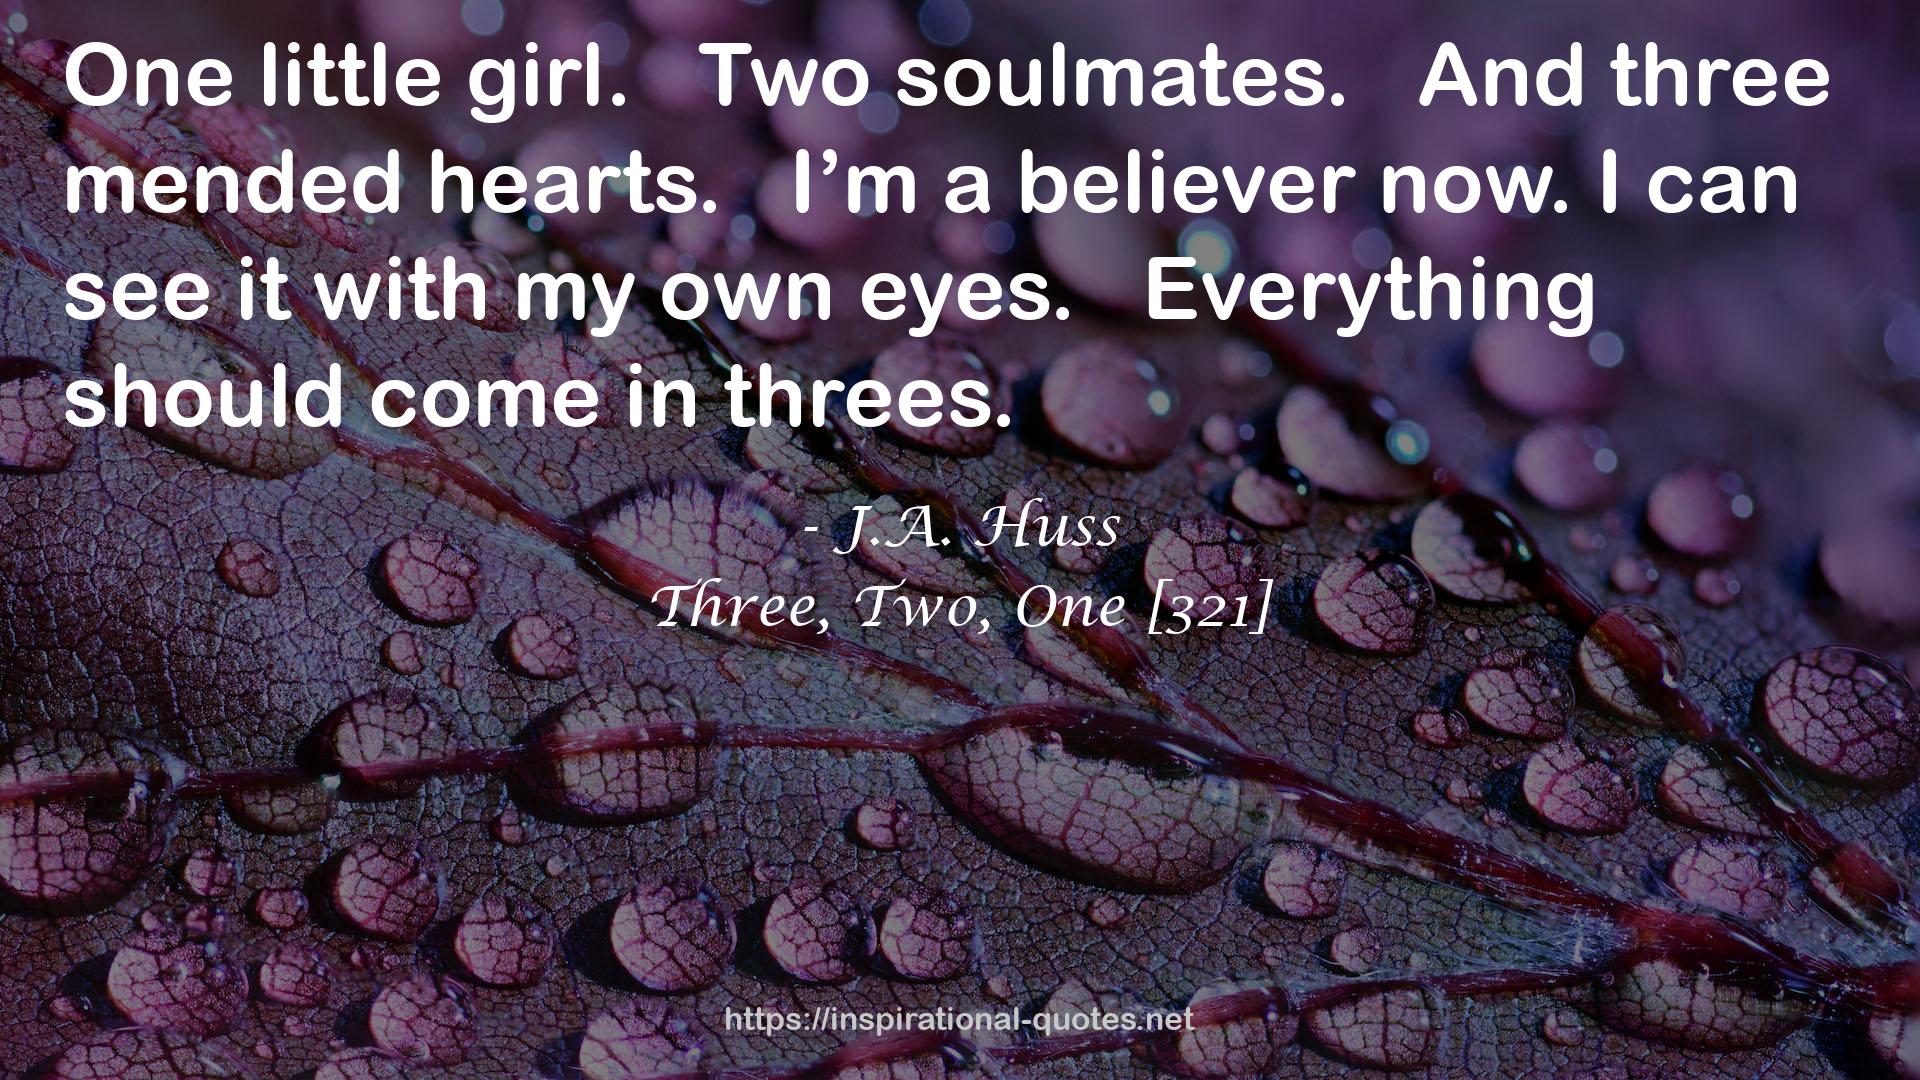 Three, Two, One [321] QUOTES